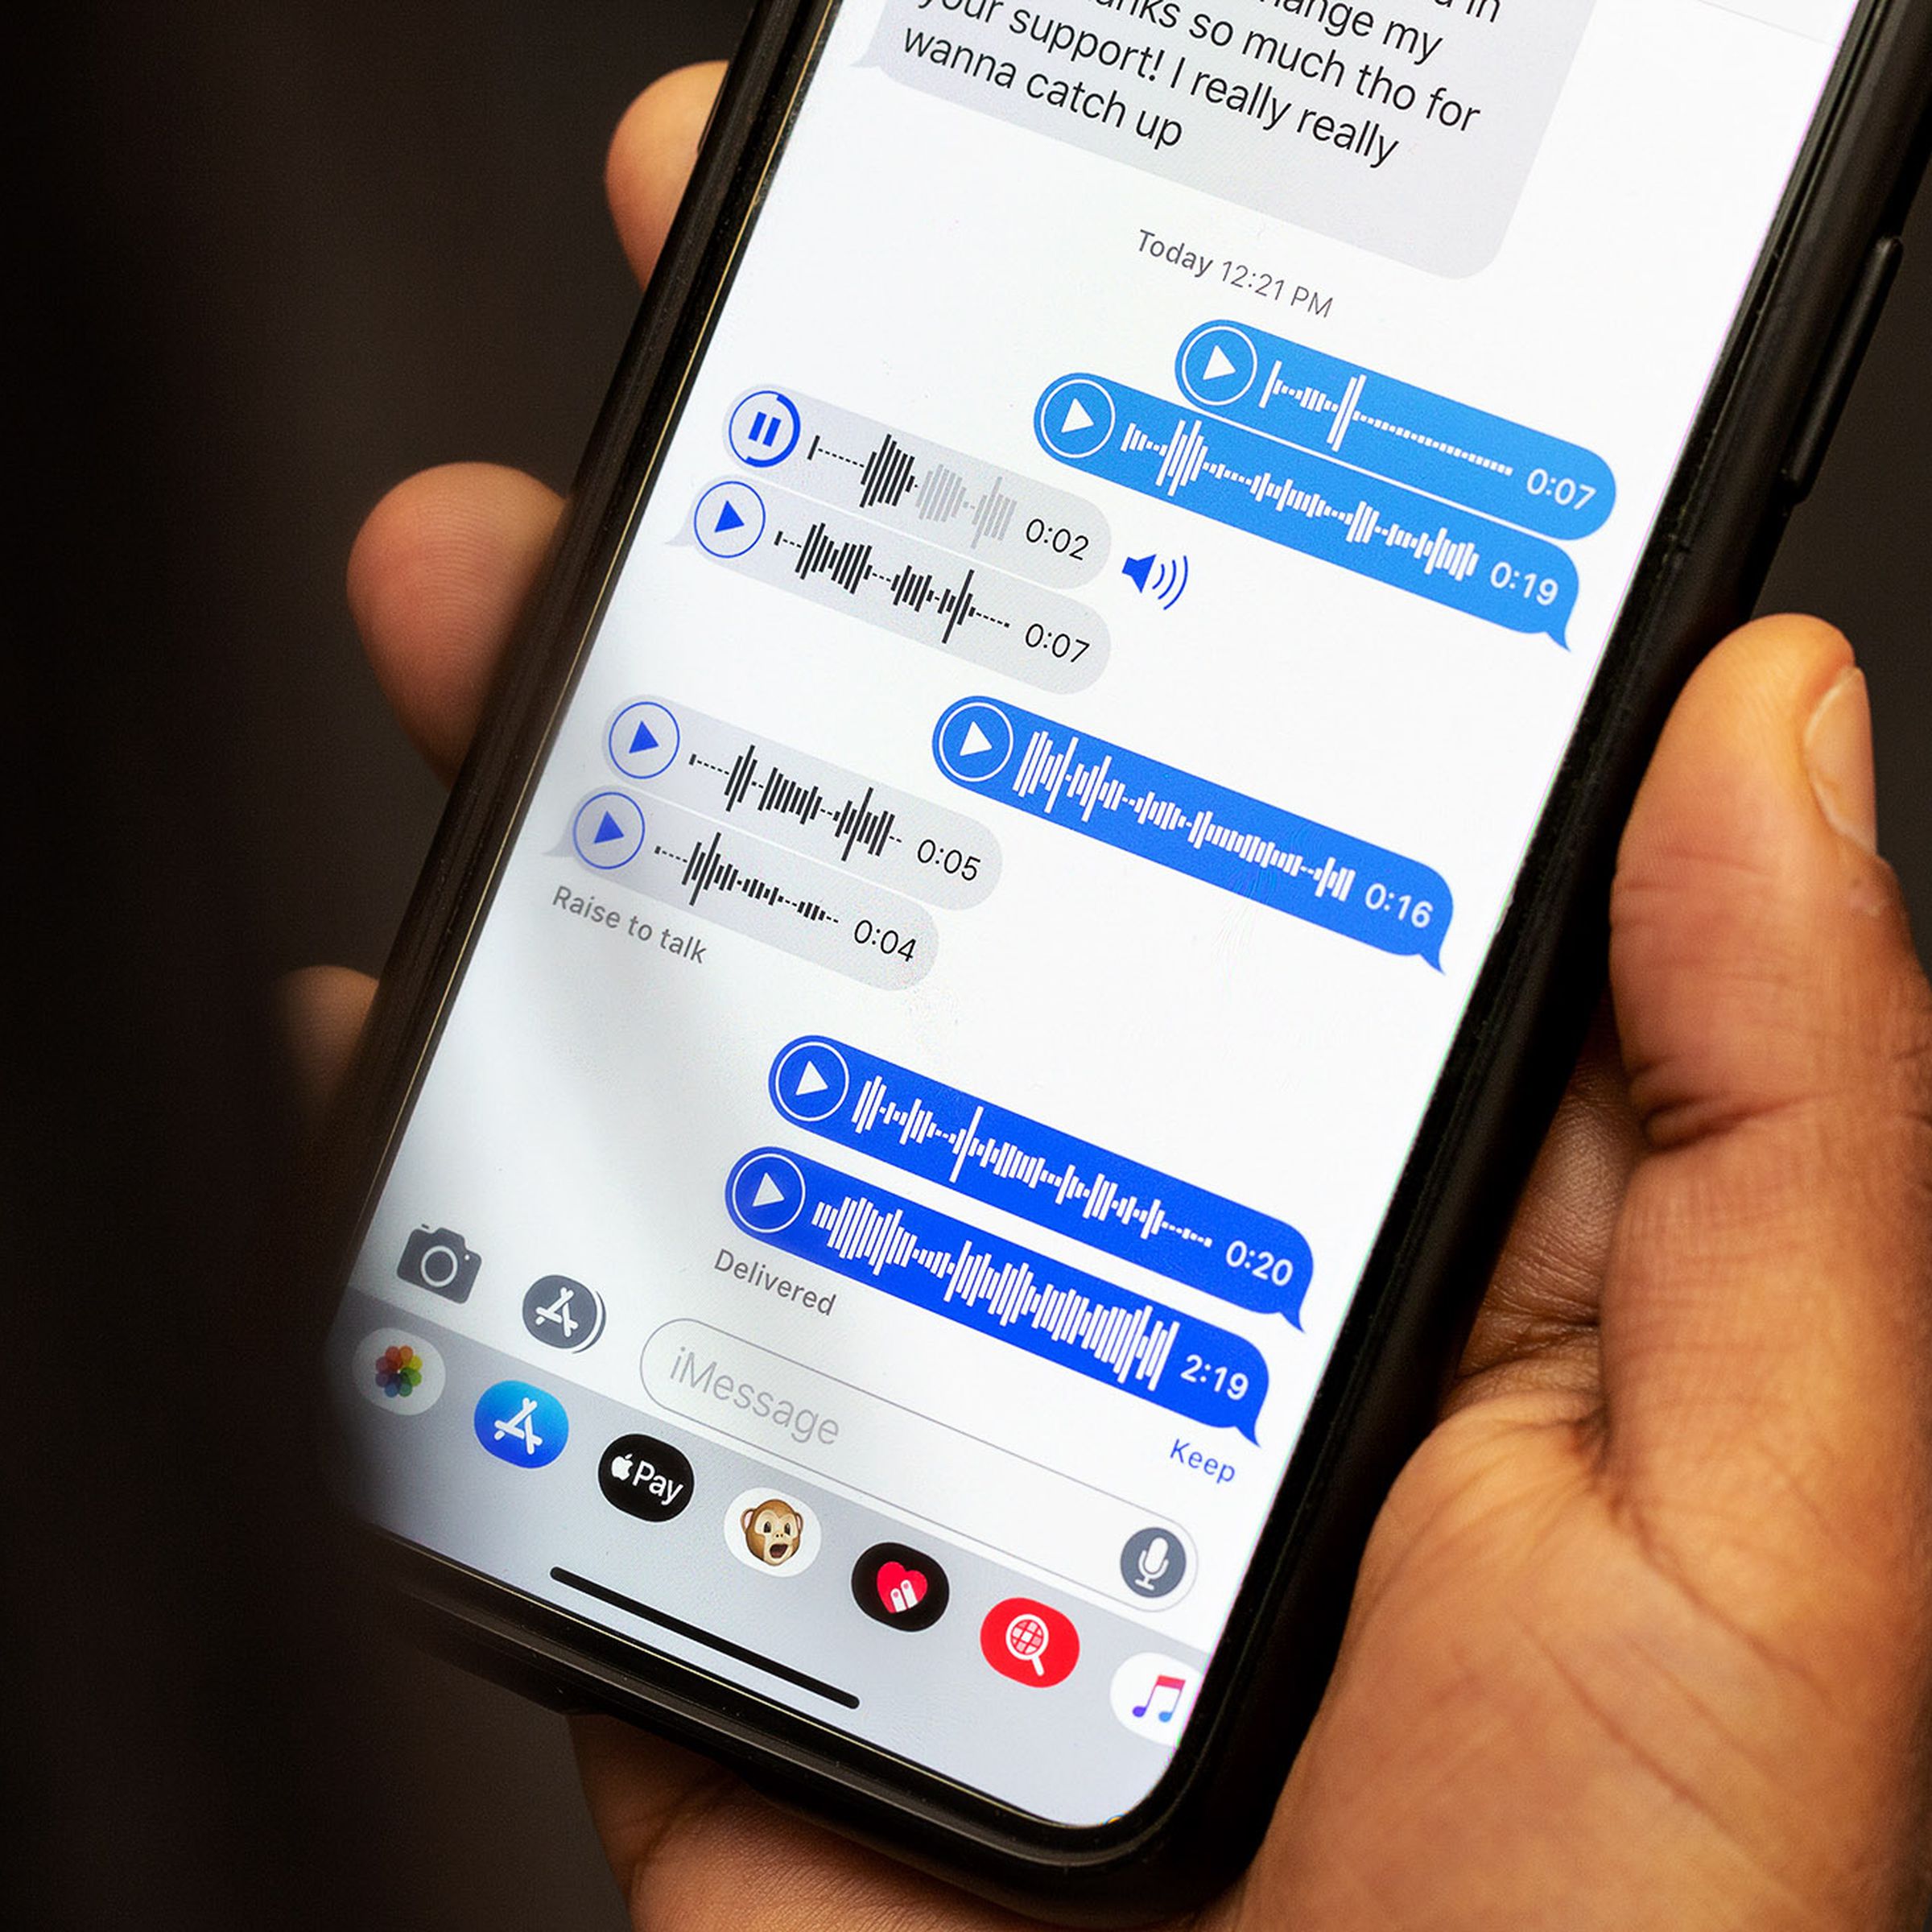 A photo showing someone use iMessage to record a voice message.